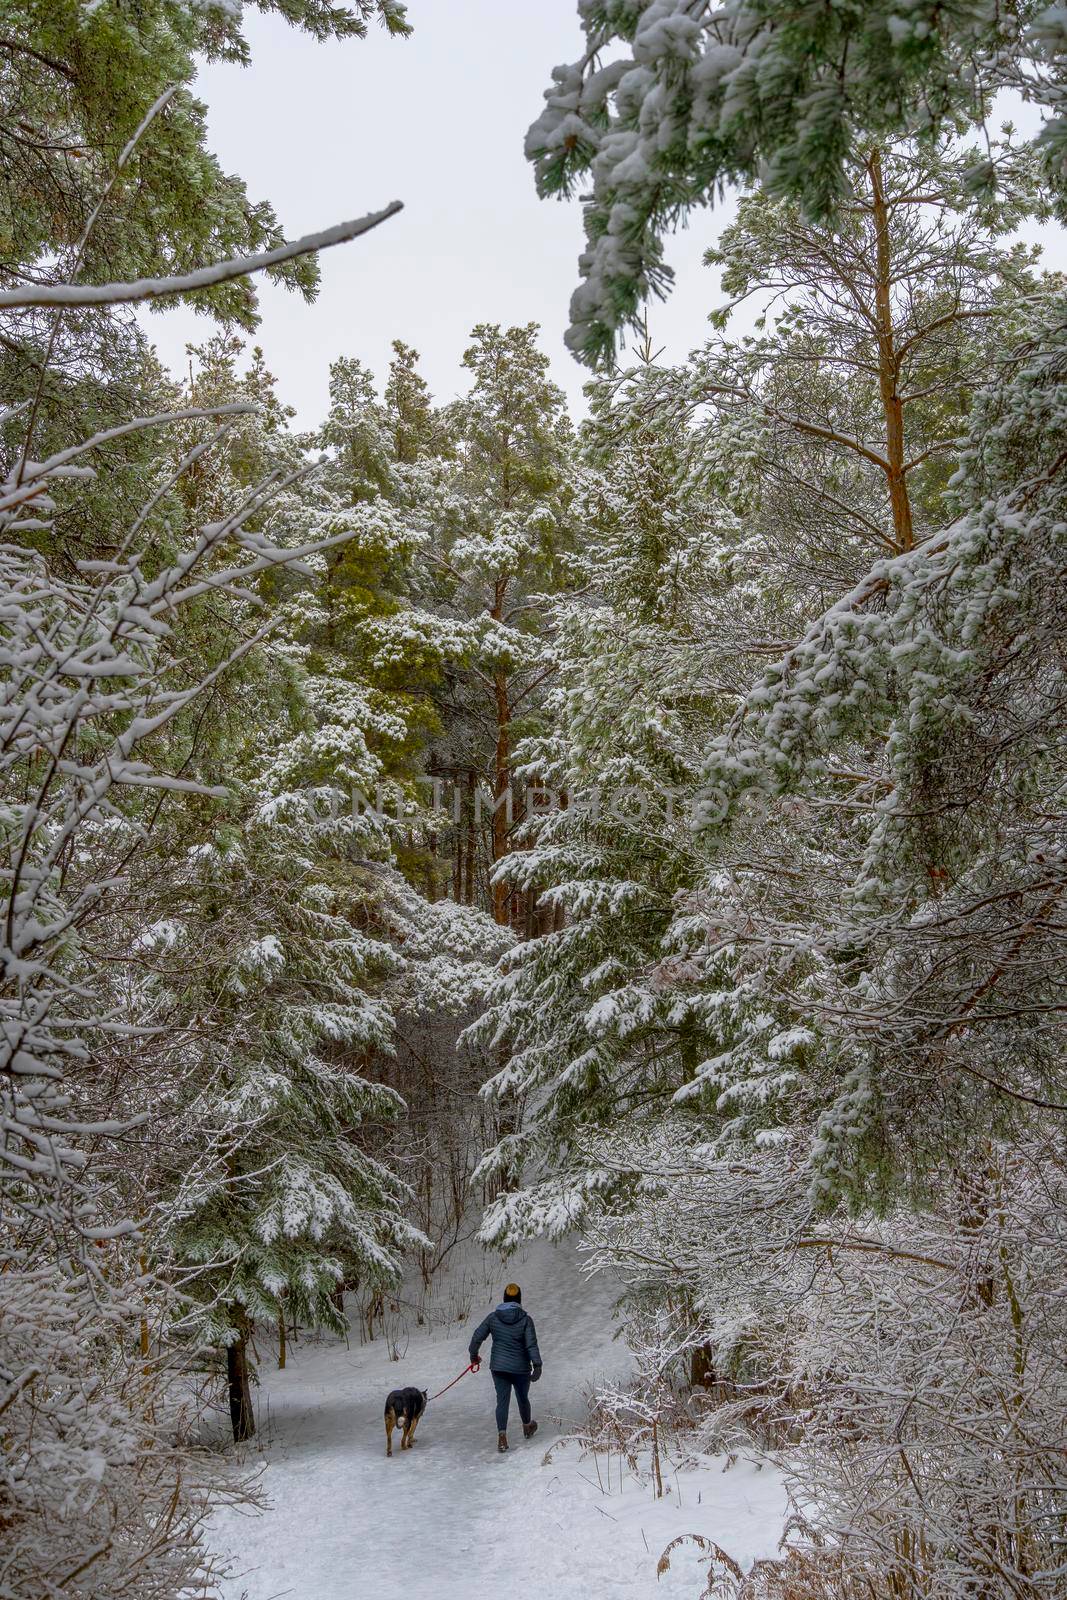 A woman with a dog goes for a walk with her dog through the winter coniferous forest